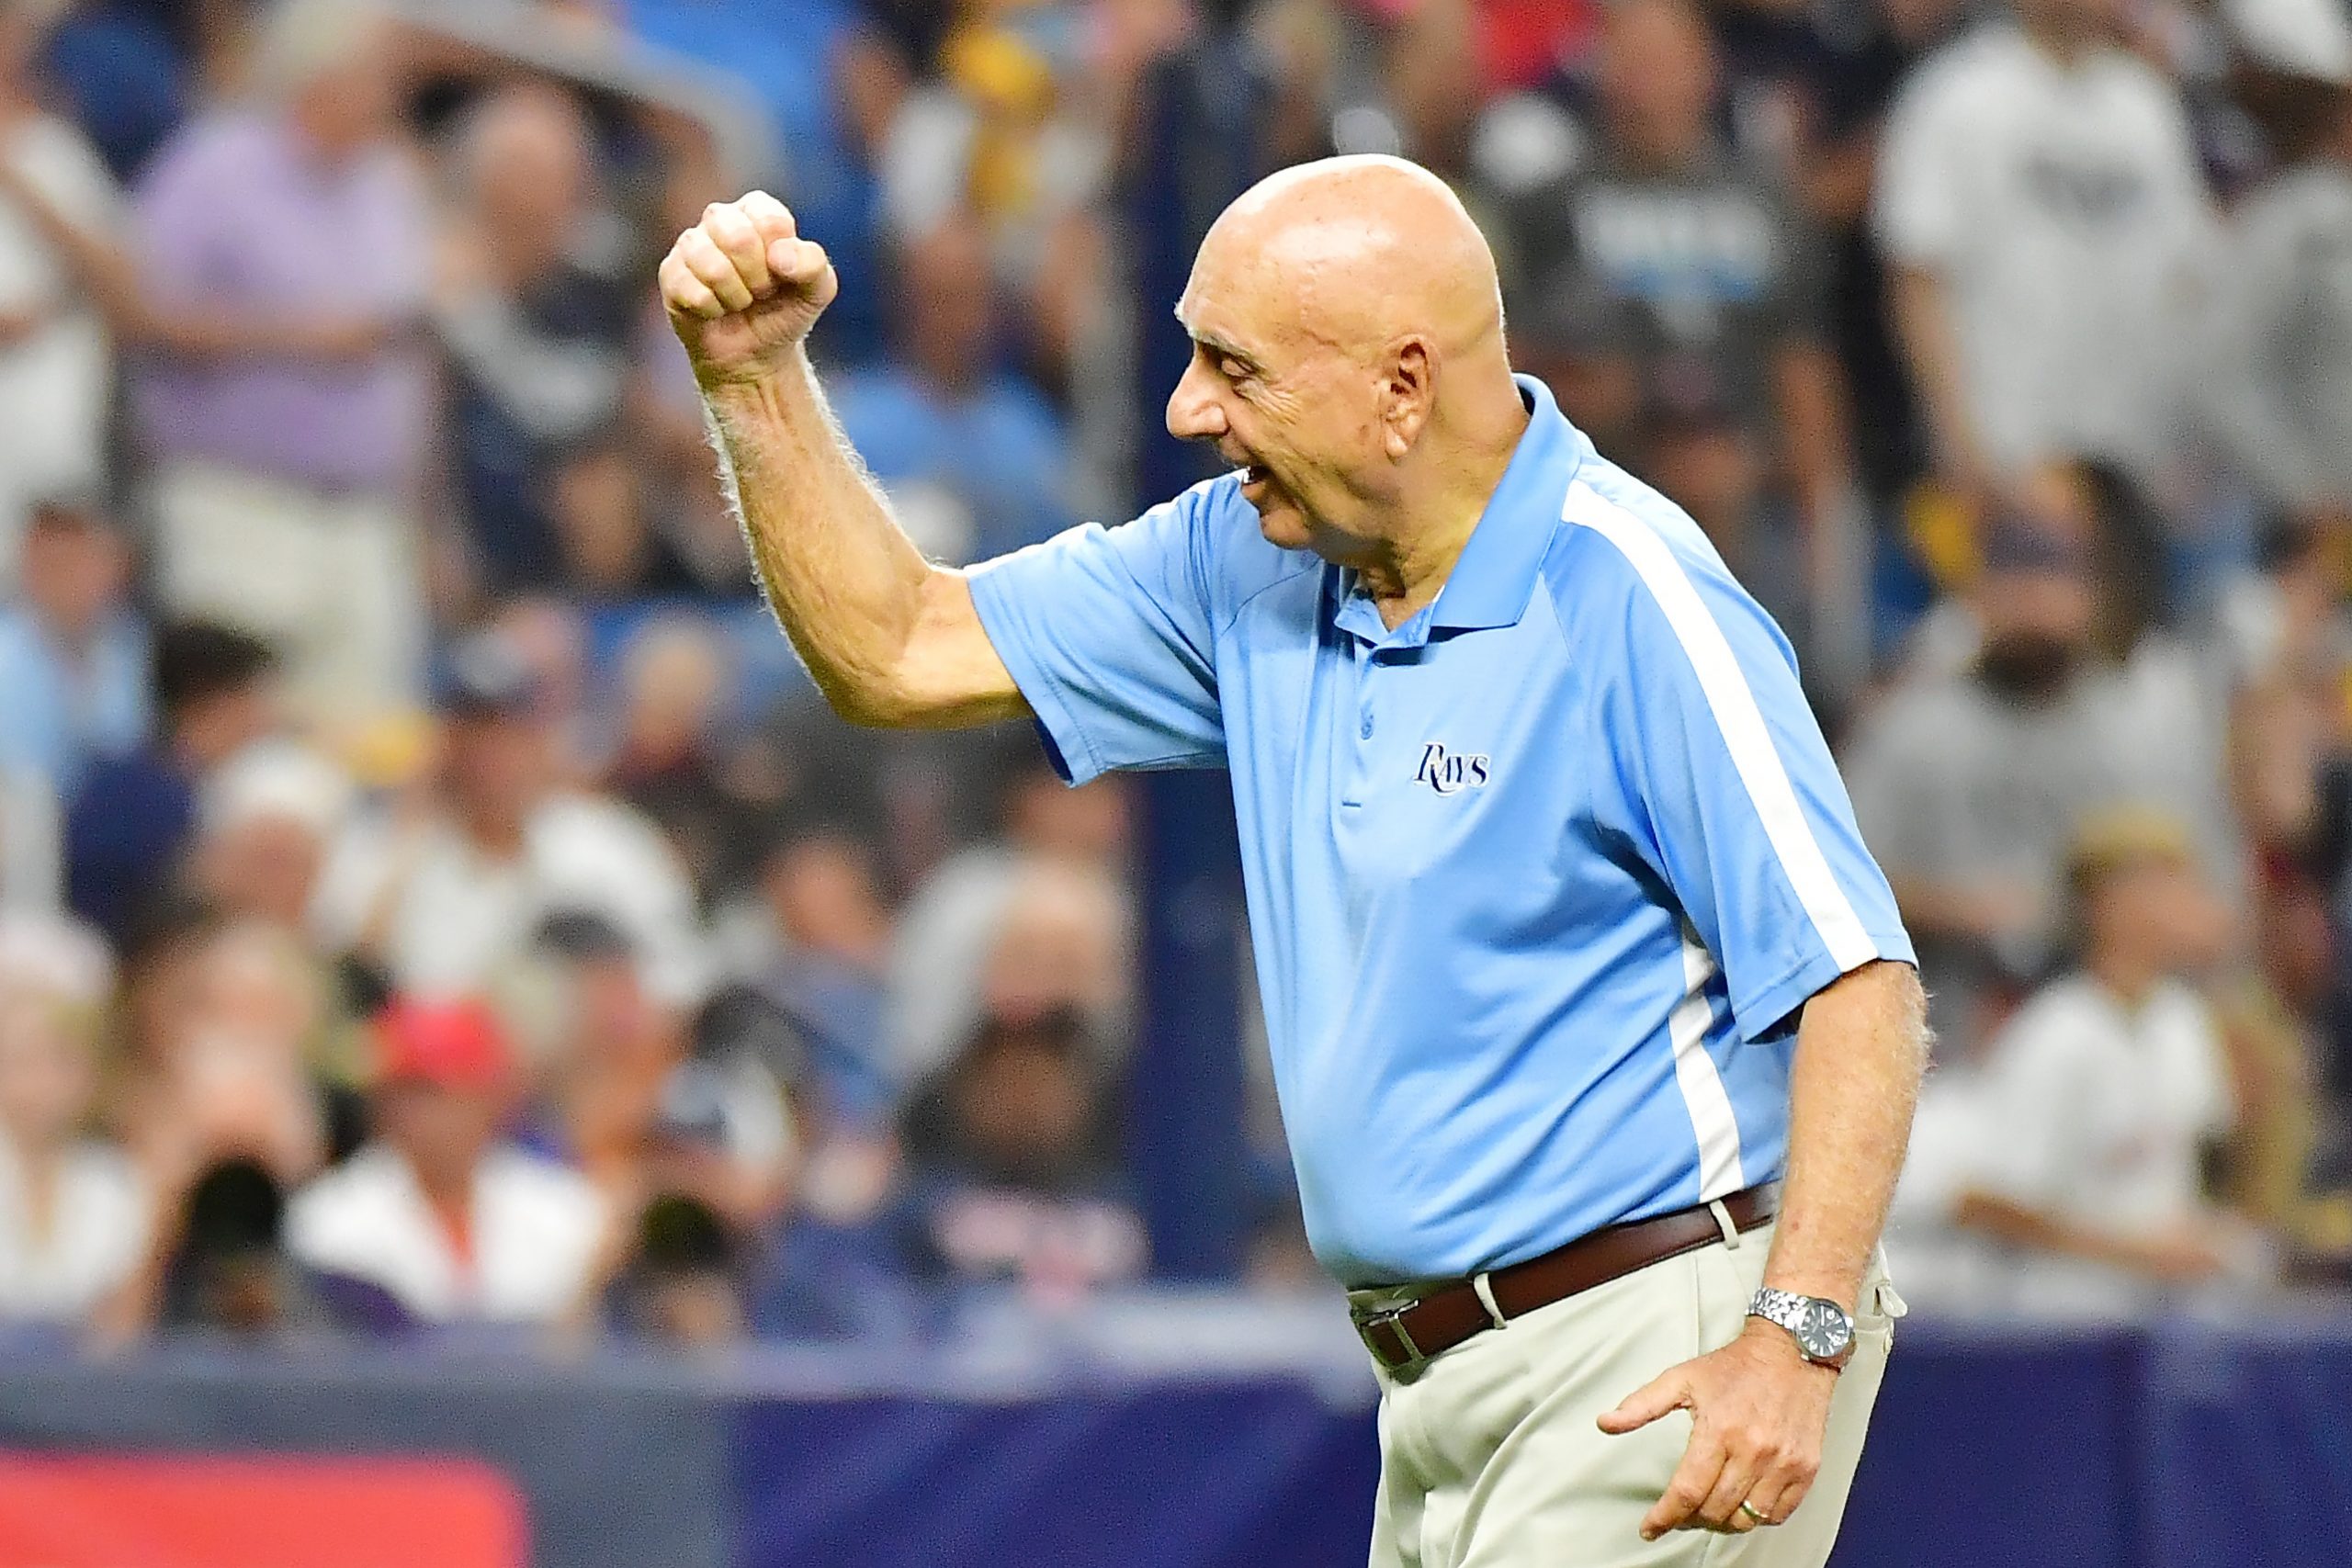 Dick Vitale reacts after throwing the opening pitch prior to Game 1 of the American League Division Series.